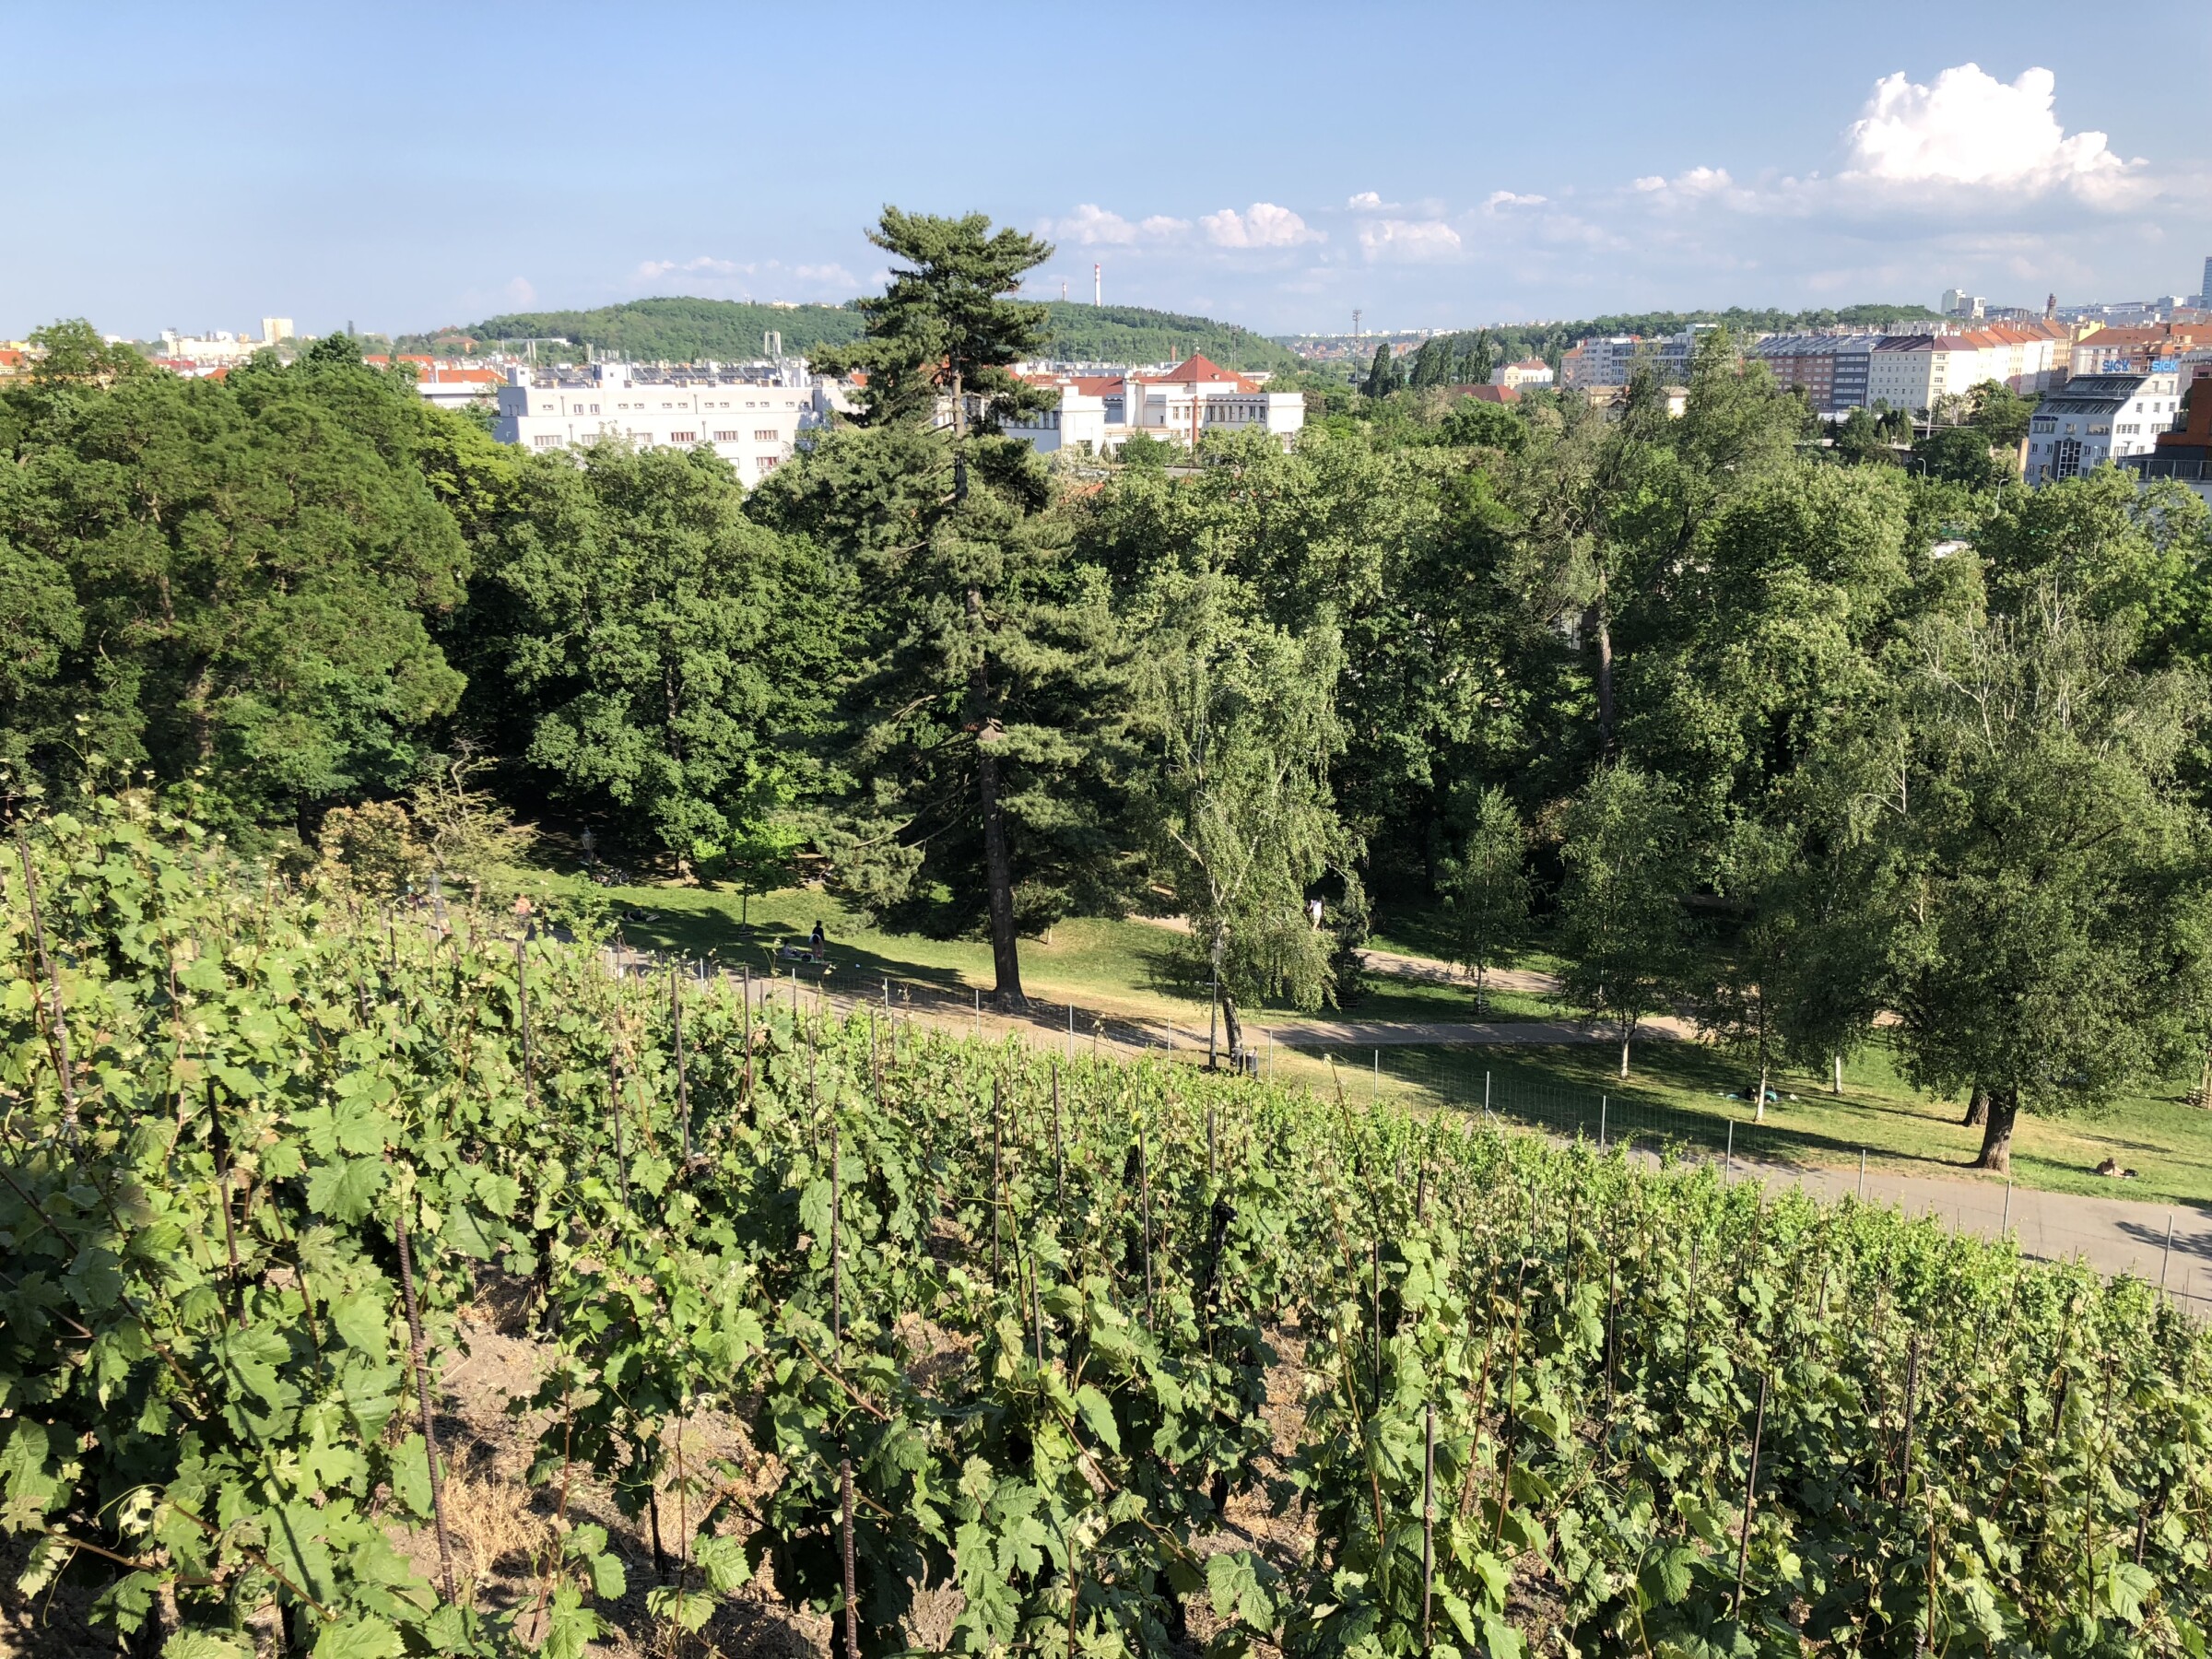 This image shows vineyards in the foreground, a oark, and Prague's skyline in the distance, facing south, from Vinicni Altan.